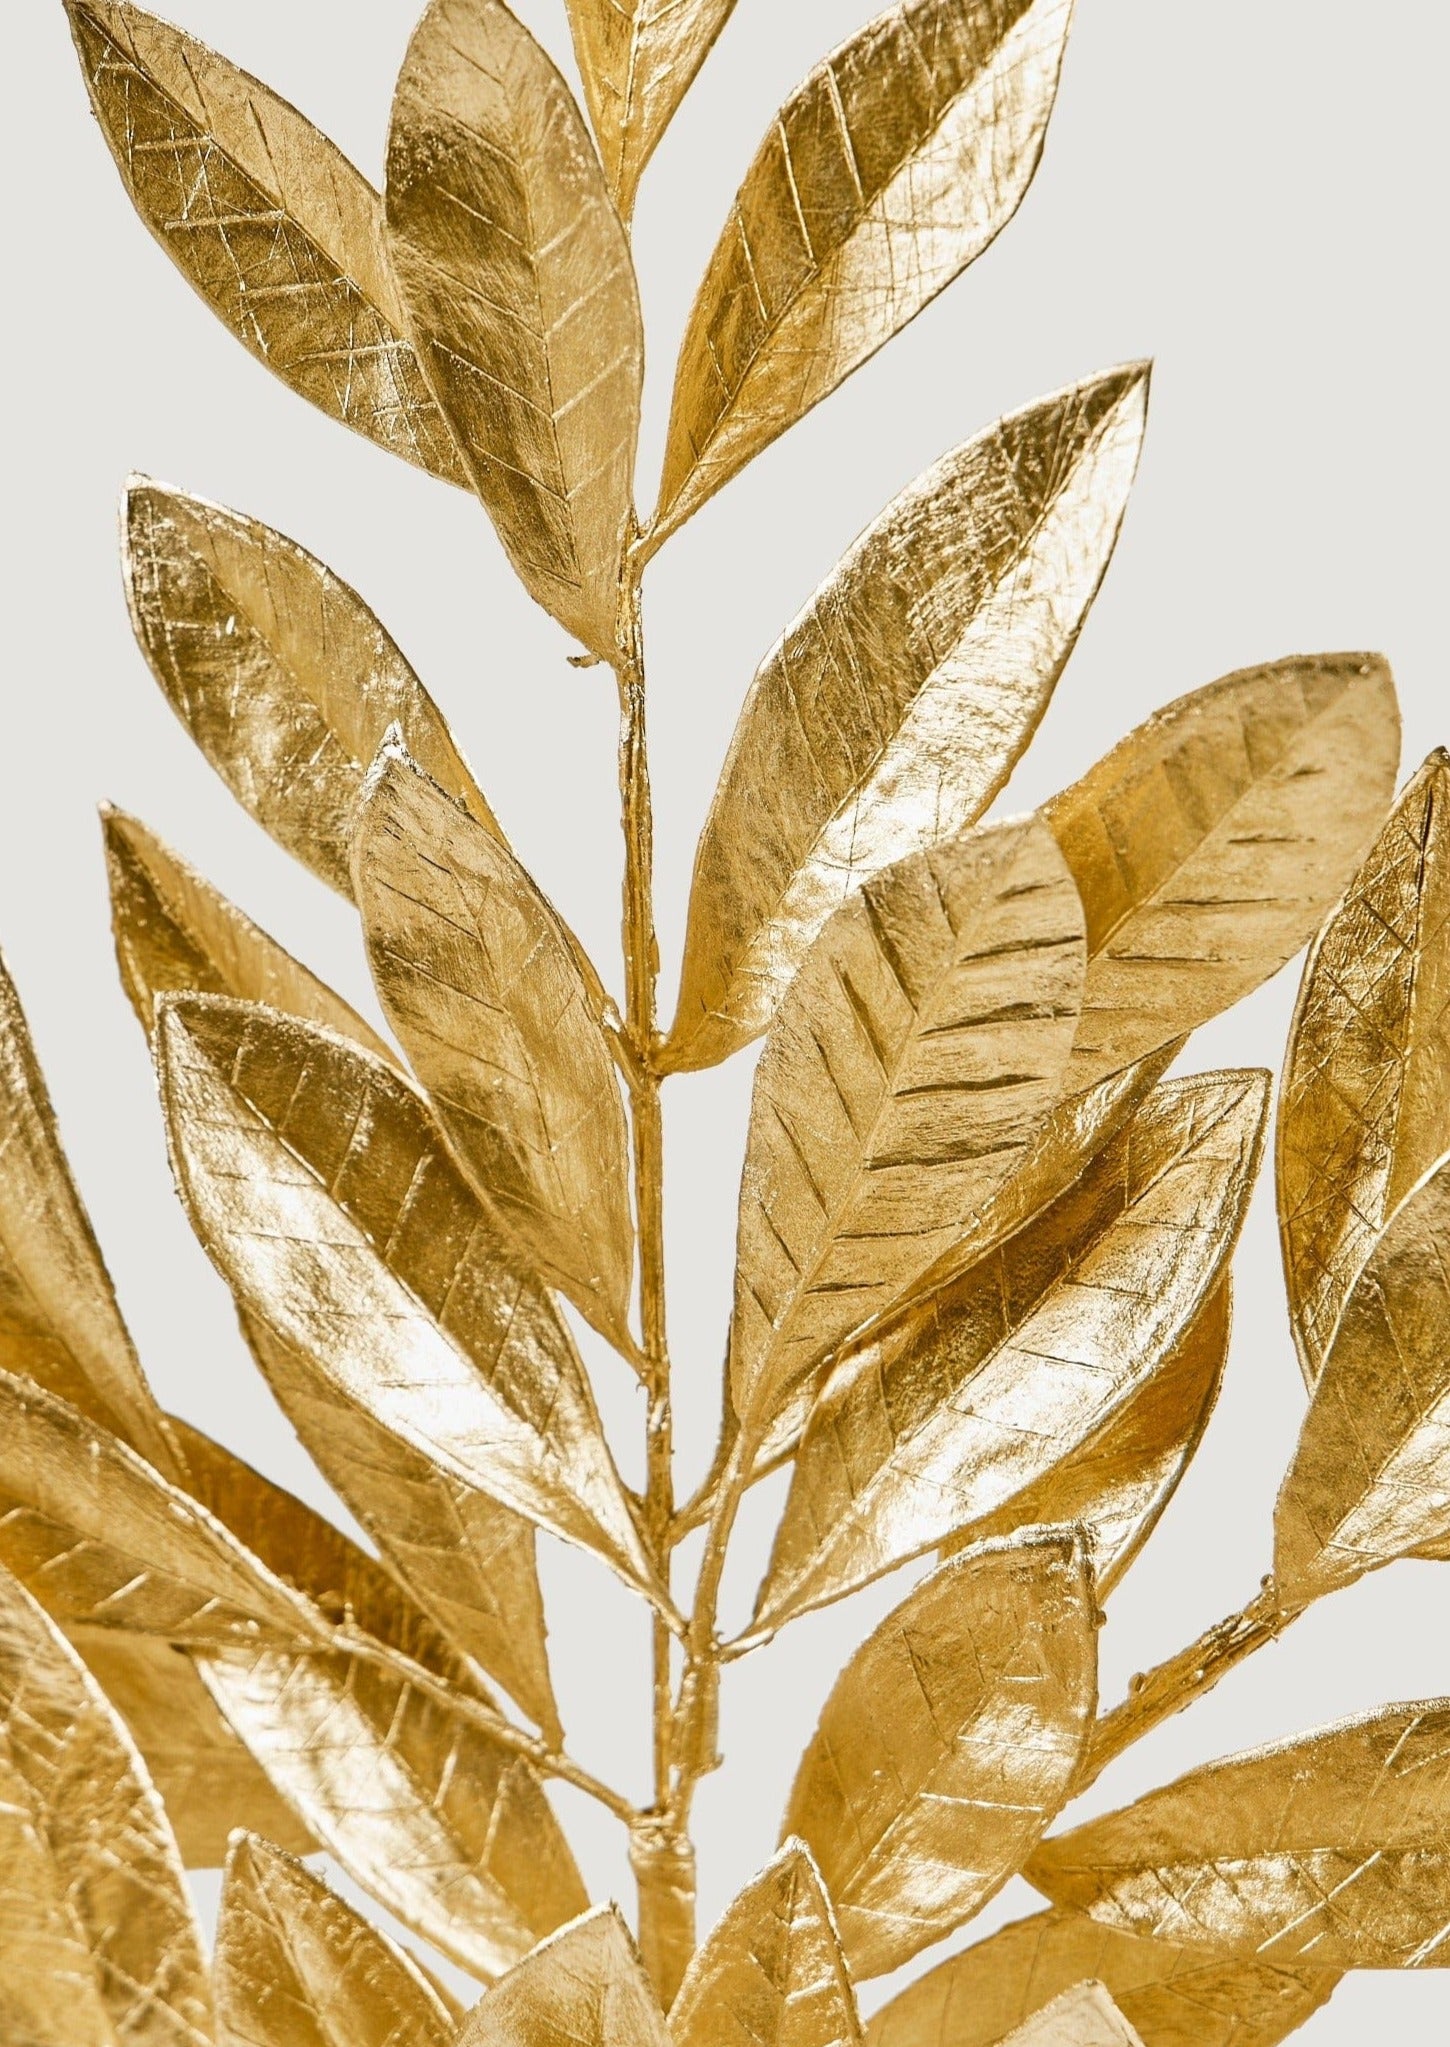 Metallic Gold Faux Christmas Bay Leaves in Closeup View